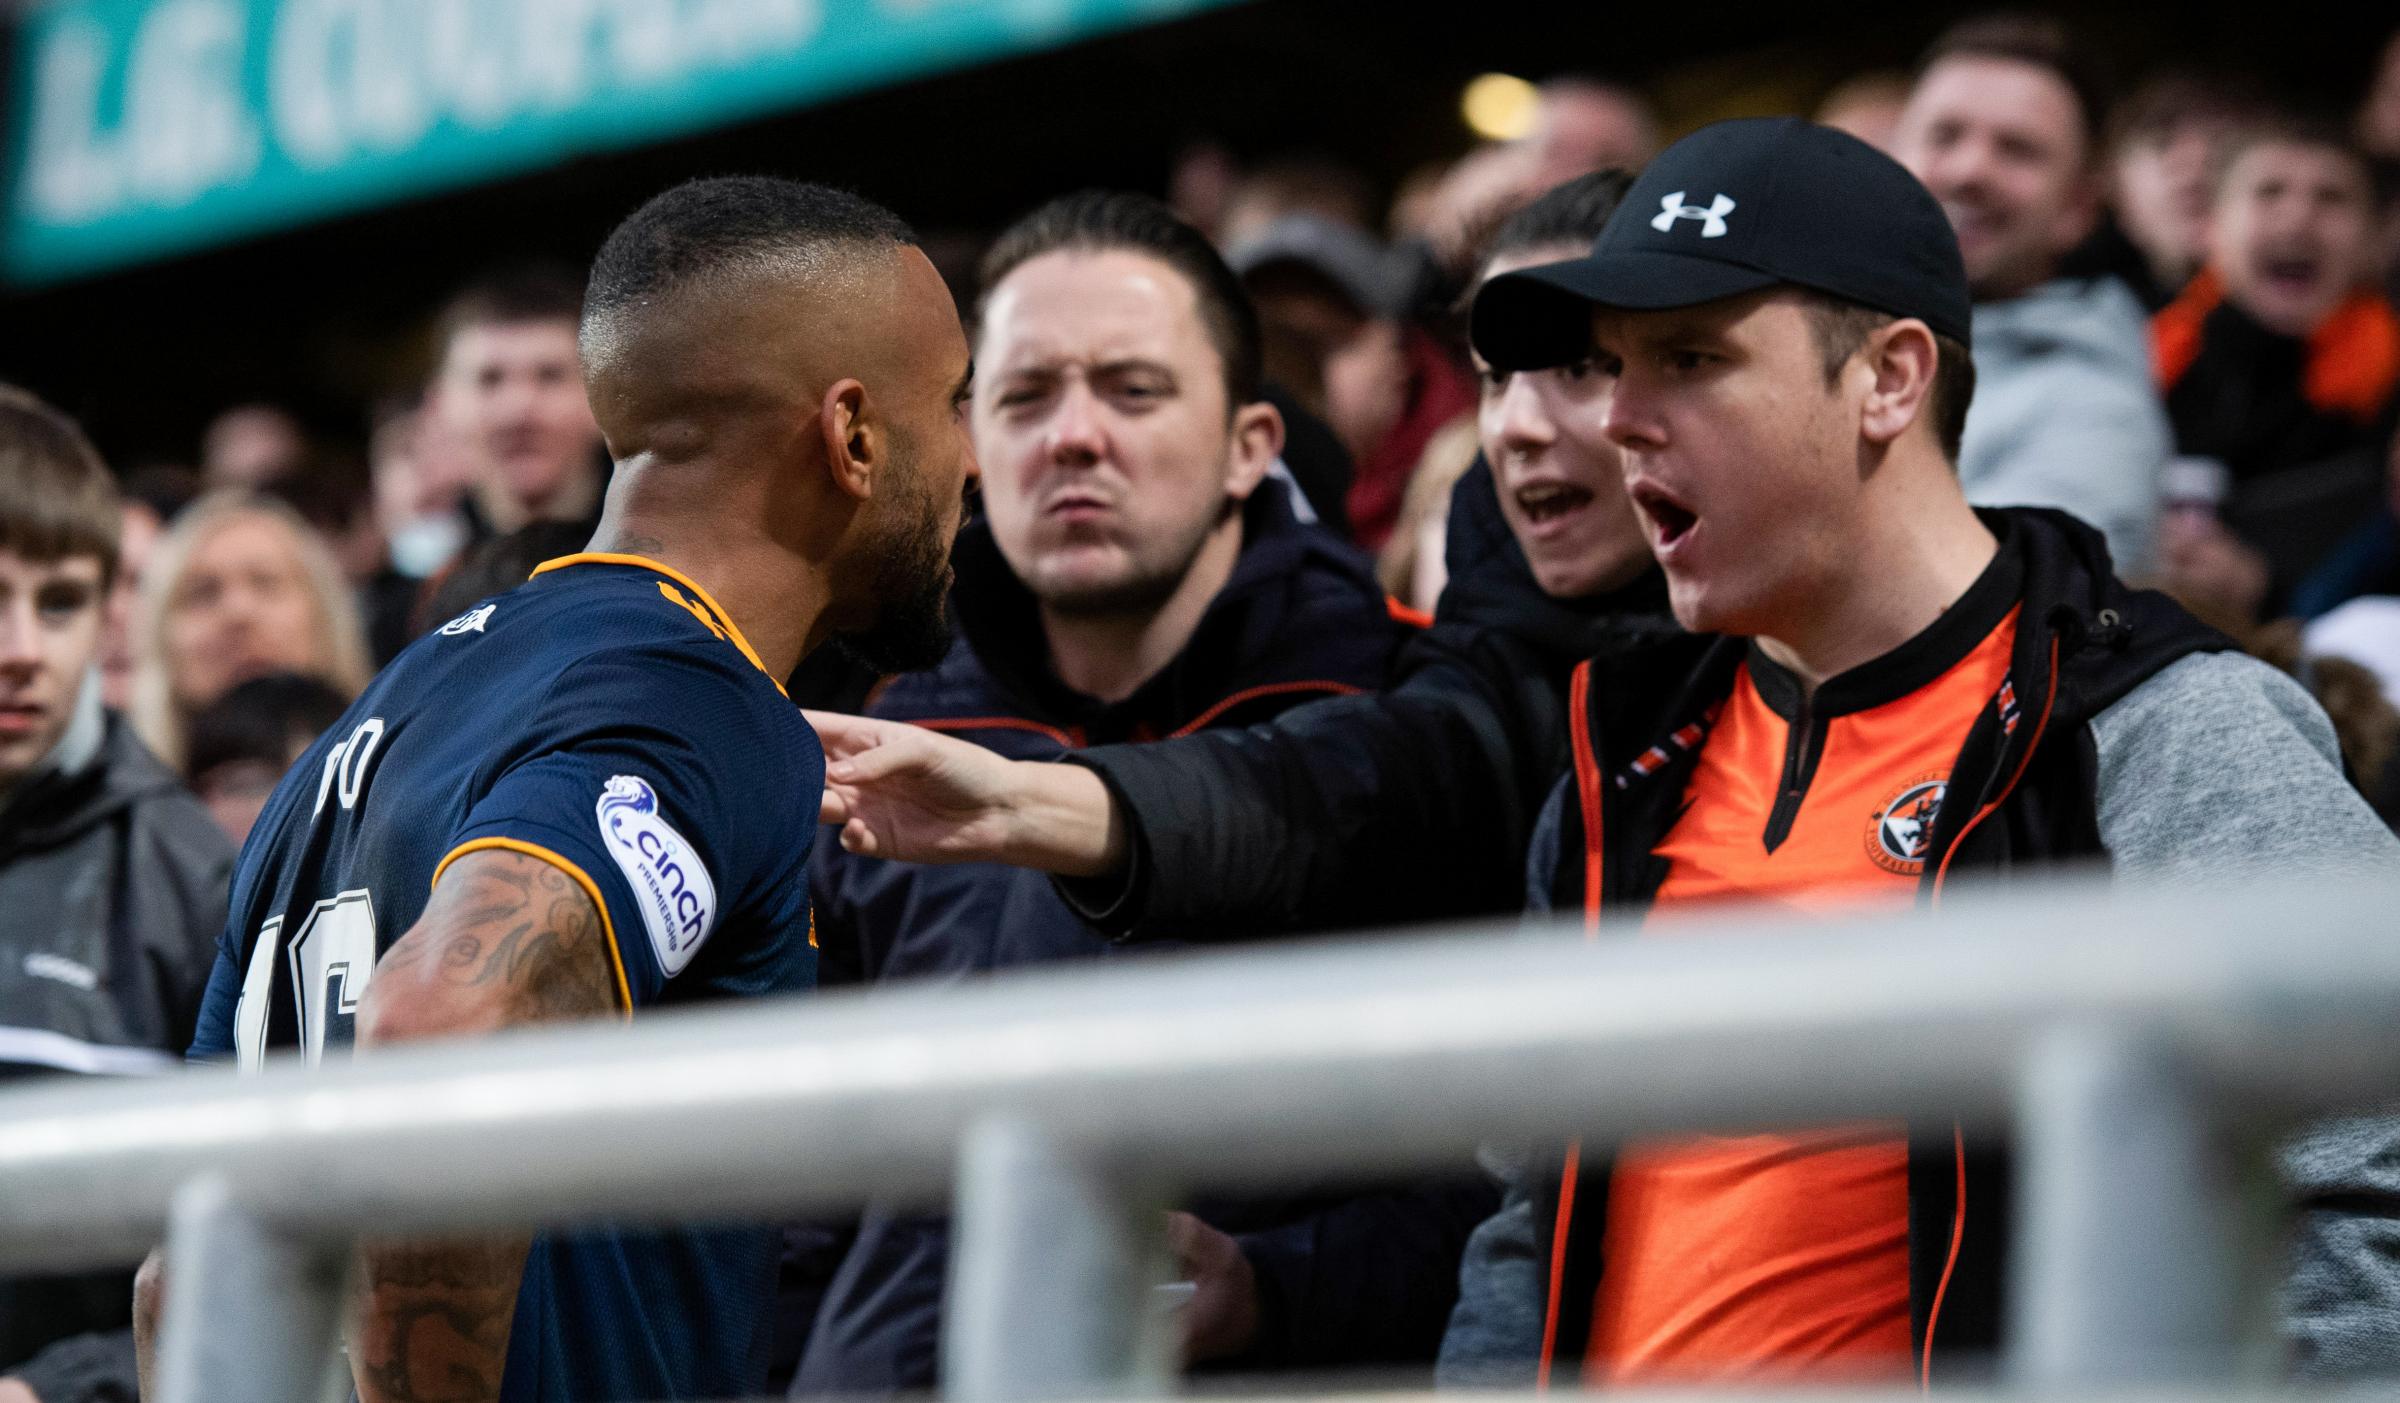 Watch: Aberdeens Funso Ojo sent off after being shoved by Dundee United fan